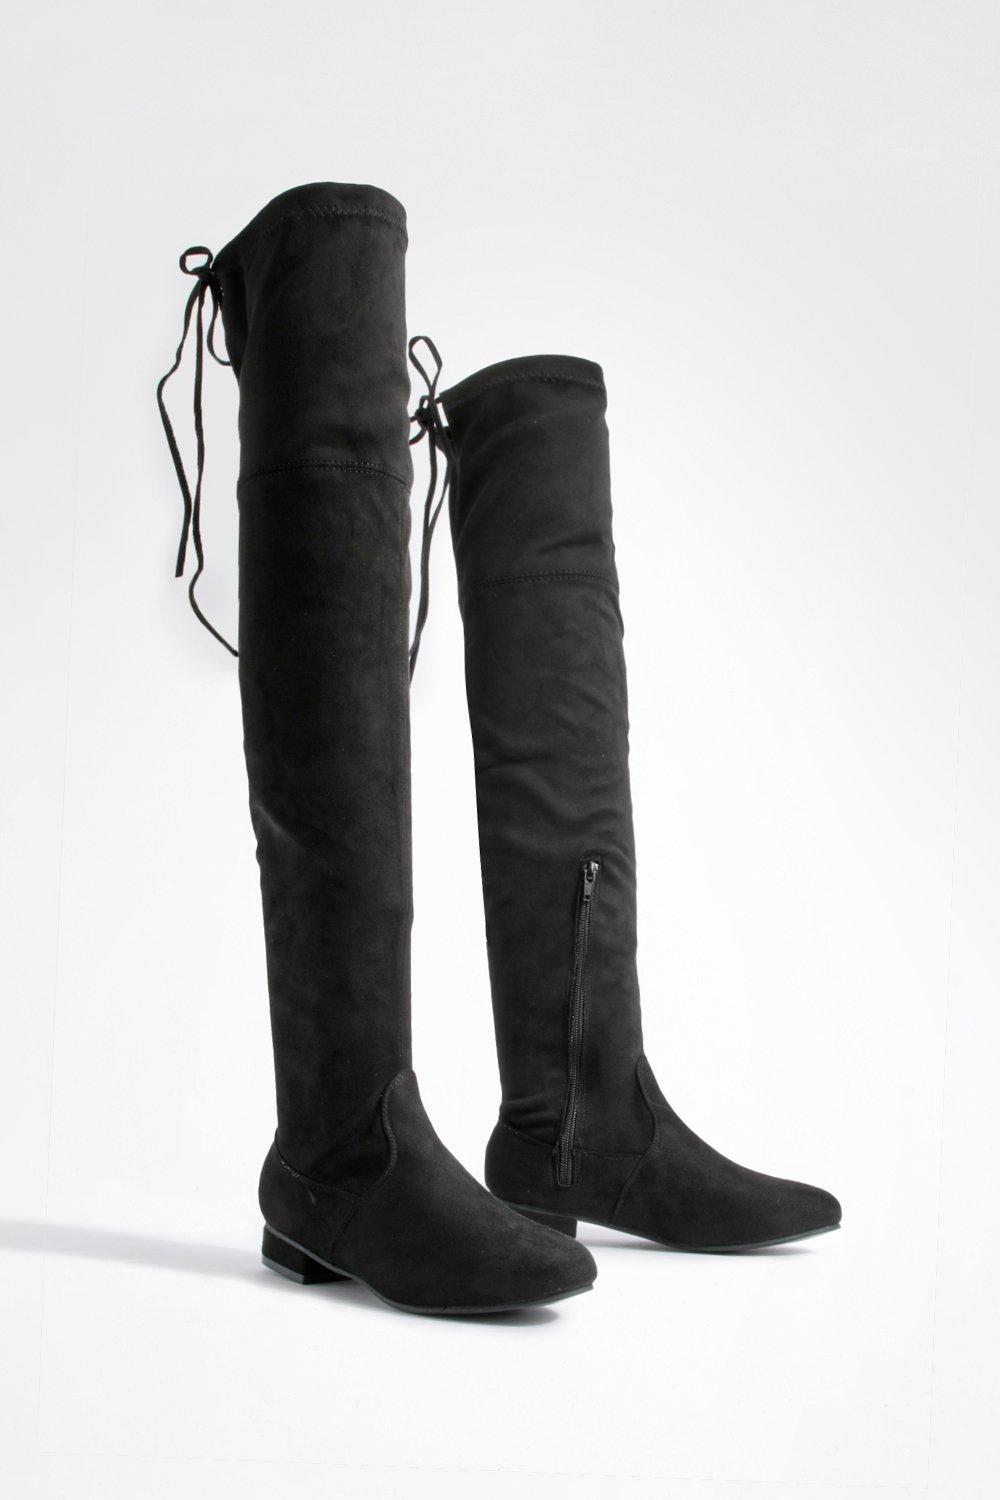 Peter Kaiser Ofela Navy Suede Leather Womens Pull On Knee High Boots 